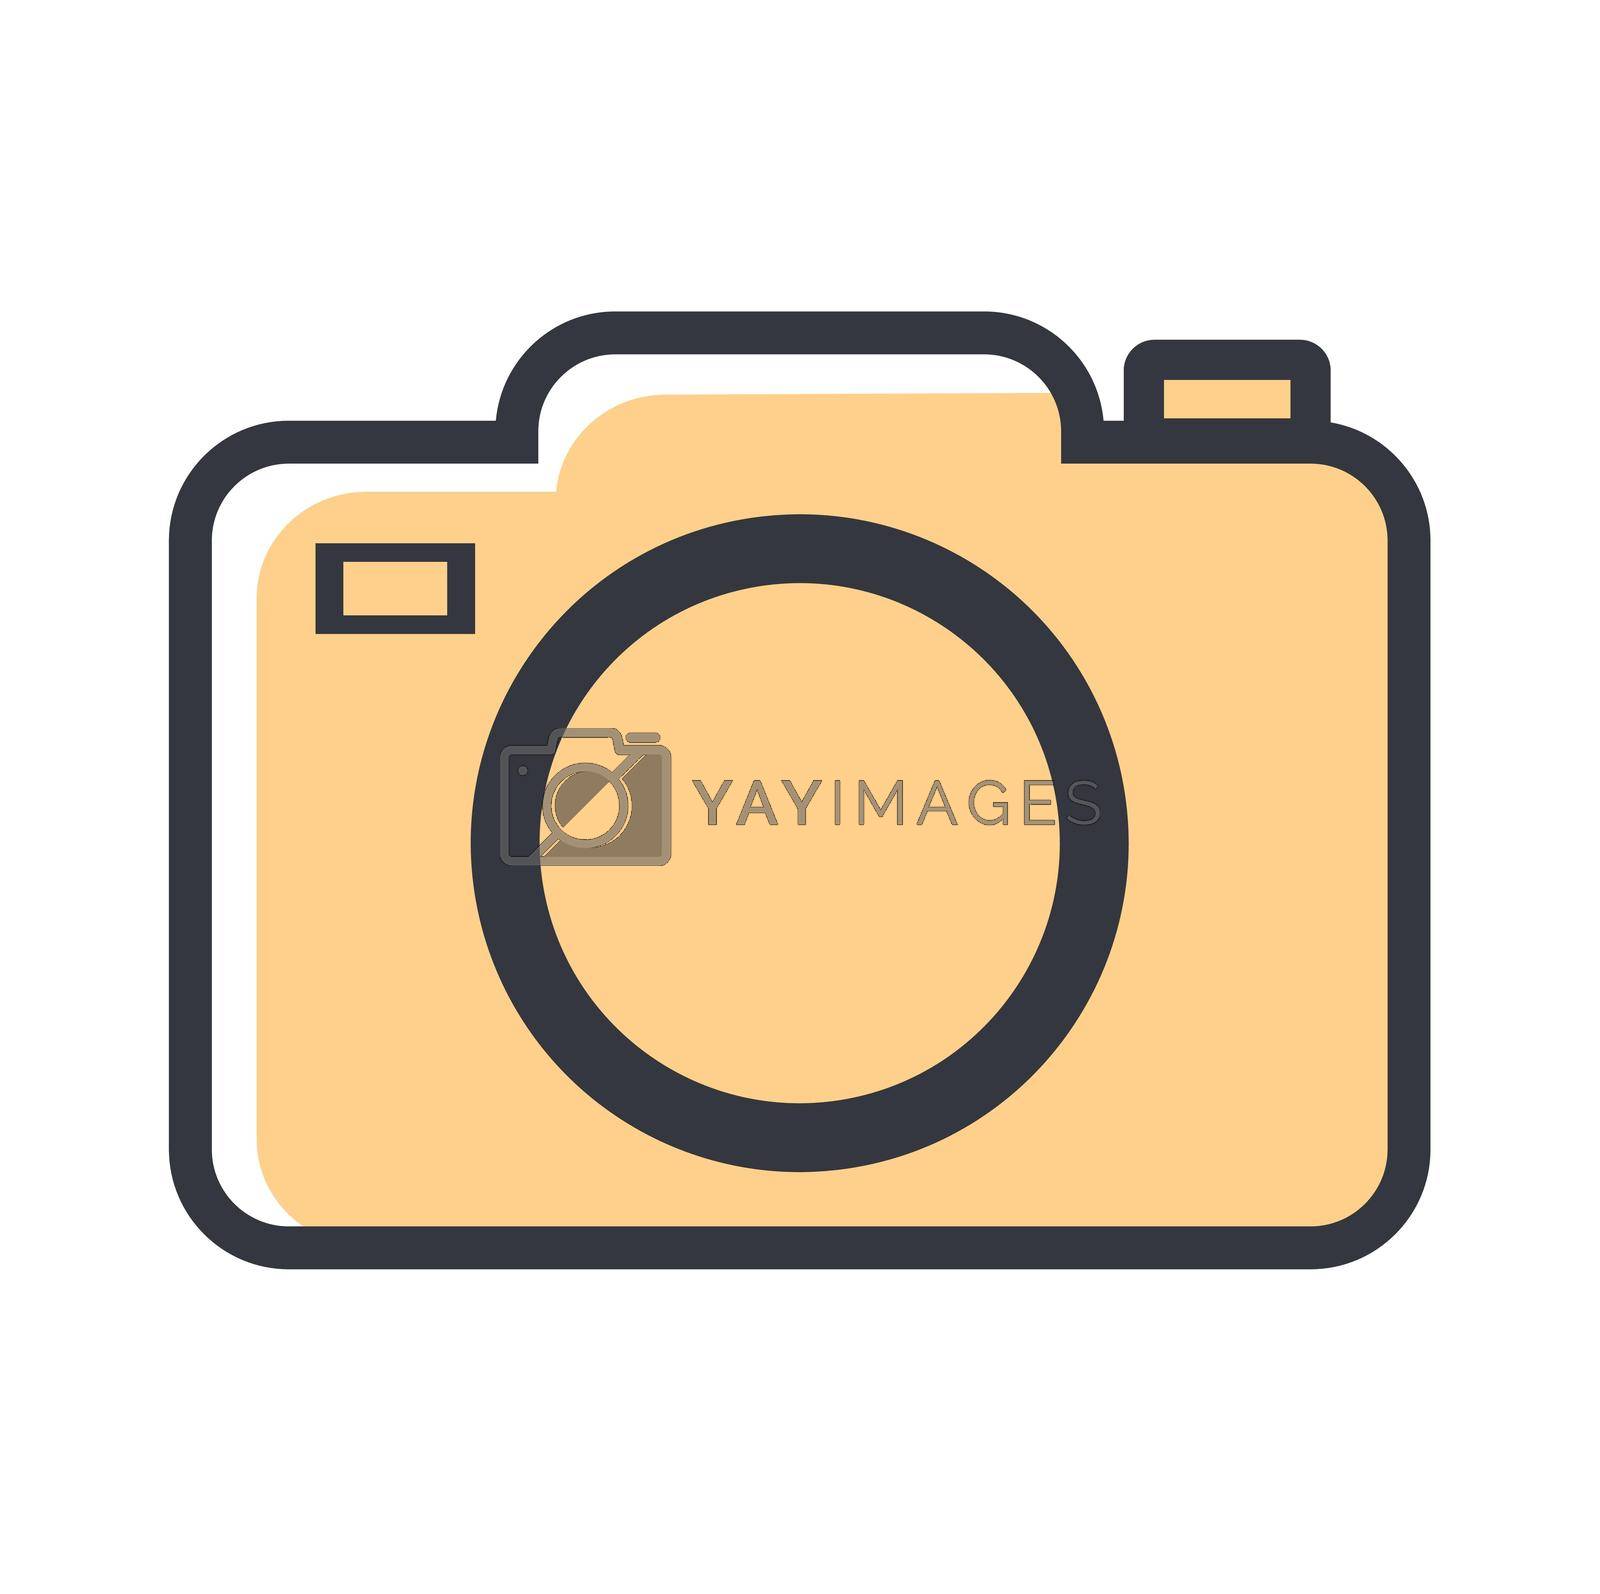 Royalty free image of camera icon symbol logo flat style  by focus_bell